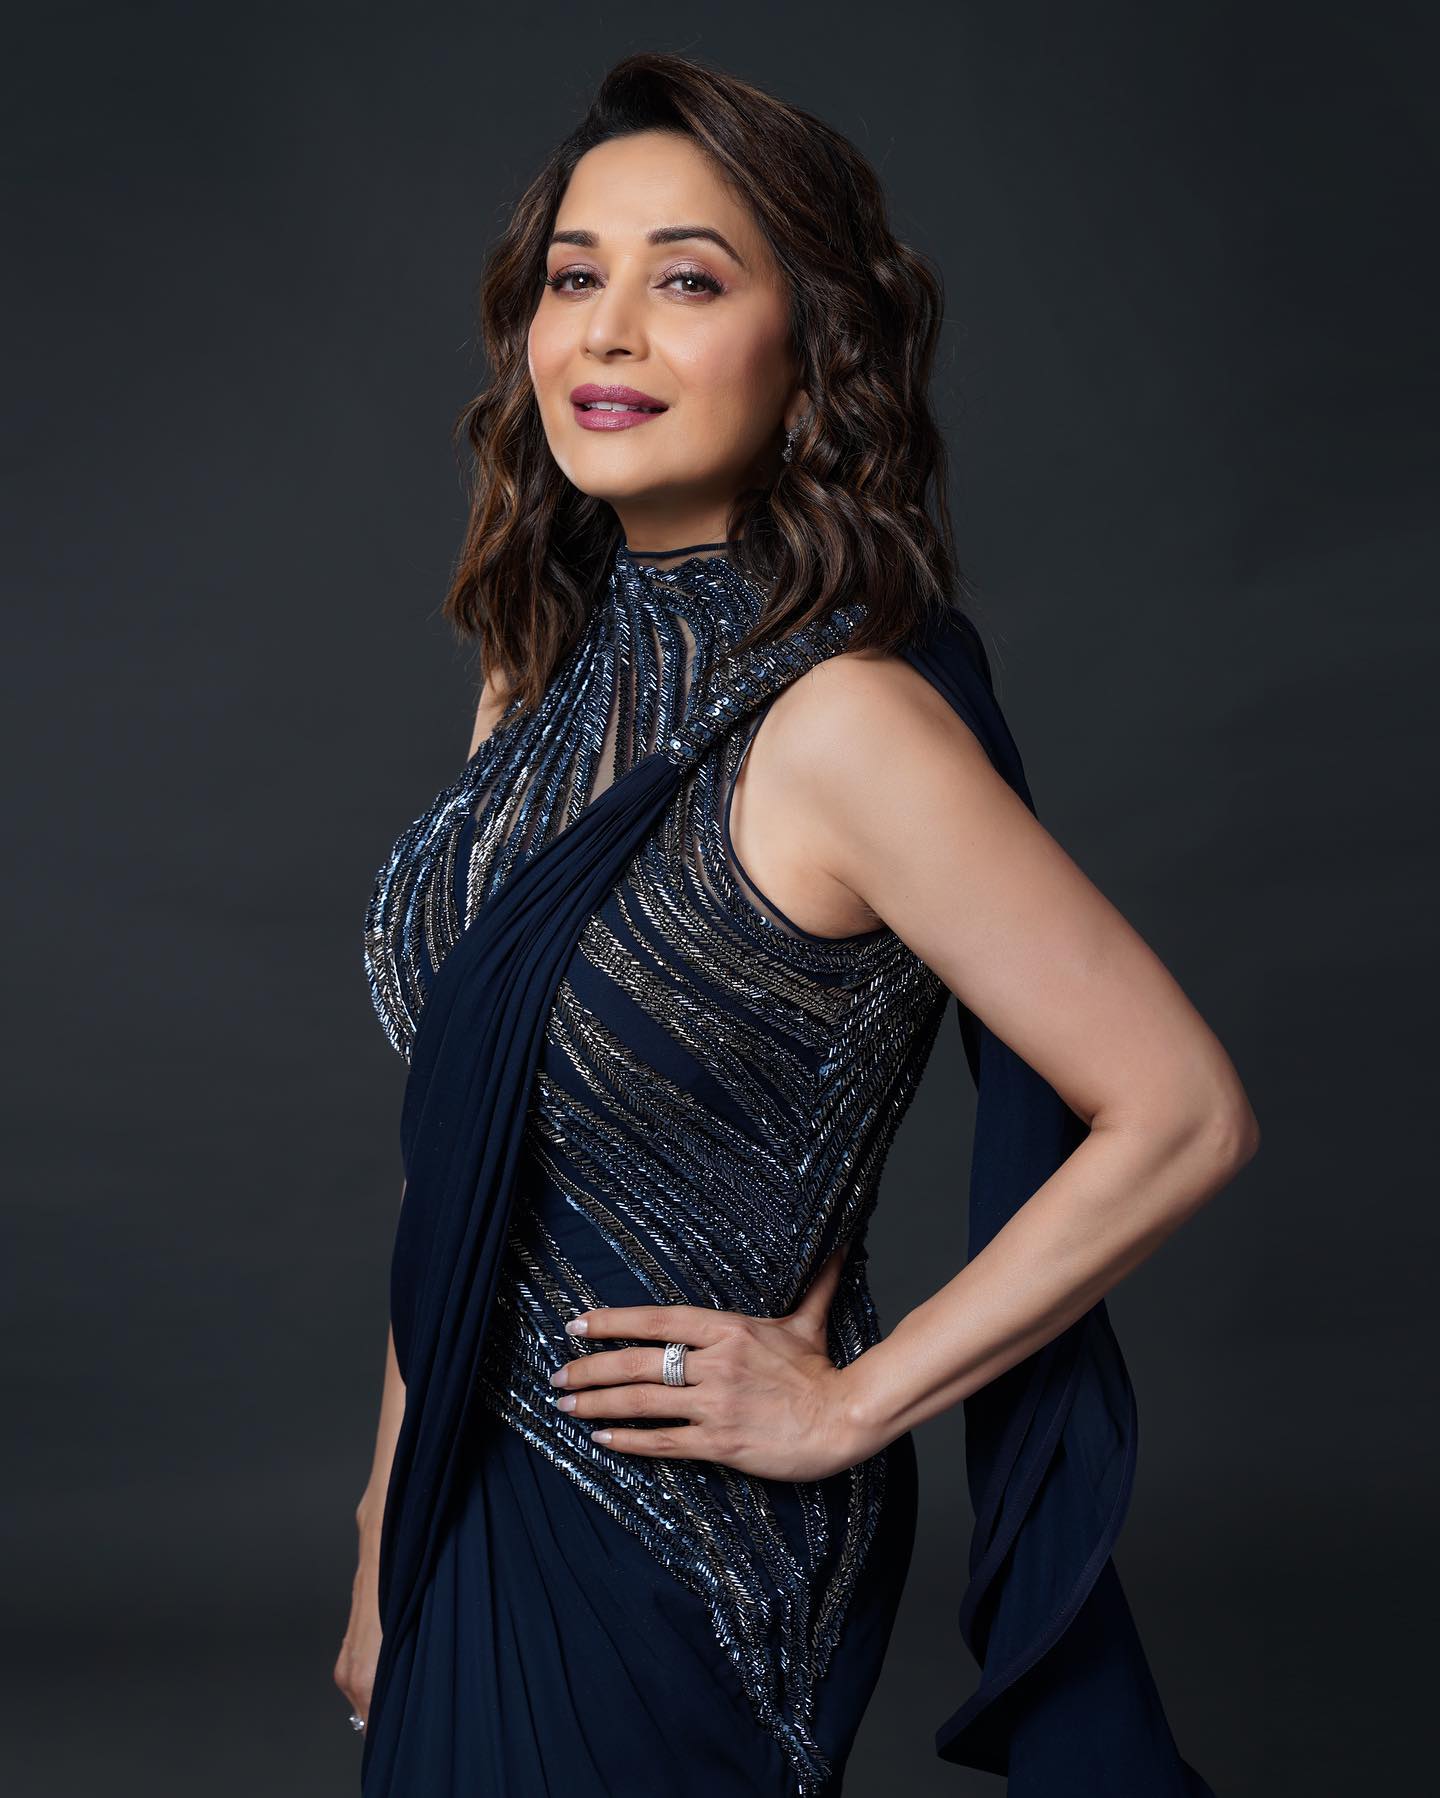 Know that actress Madhuri Dixit is the owner of property worth many crores, she is very fond of expensive and luxury vehicles.